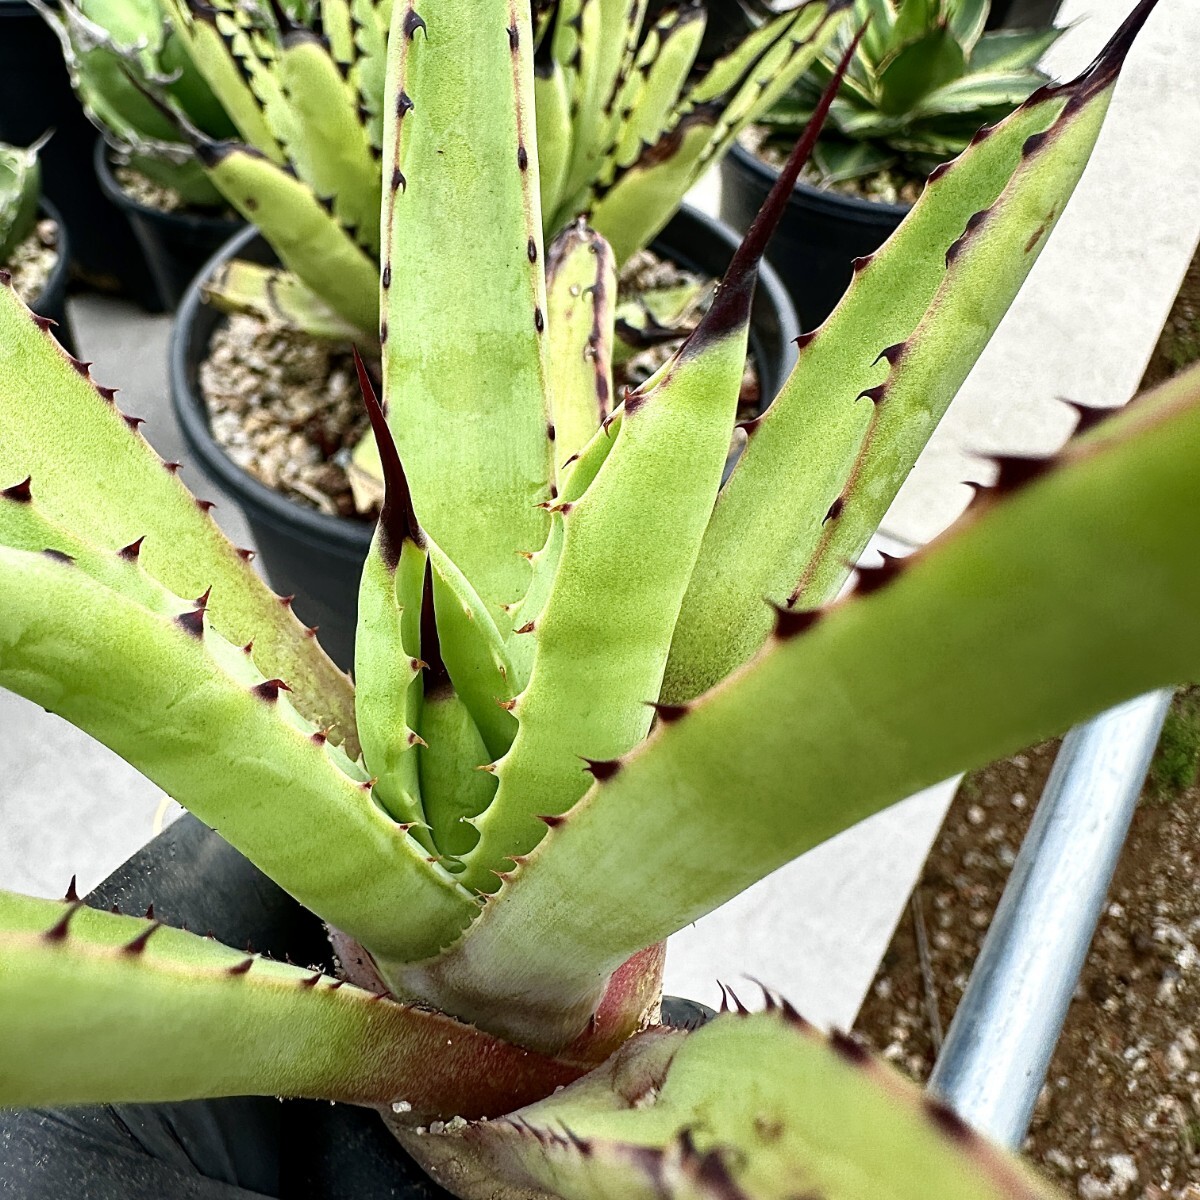 [Lj_plants]Z67 agave macro a can saAgave macroacantha finest quality large . stock 1 stock 